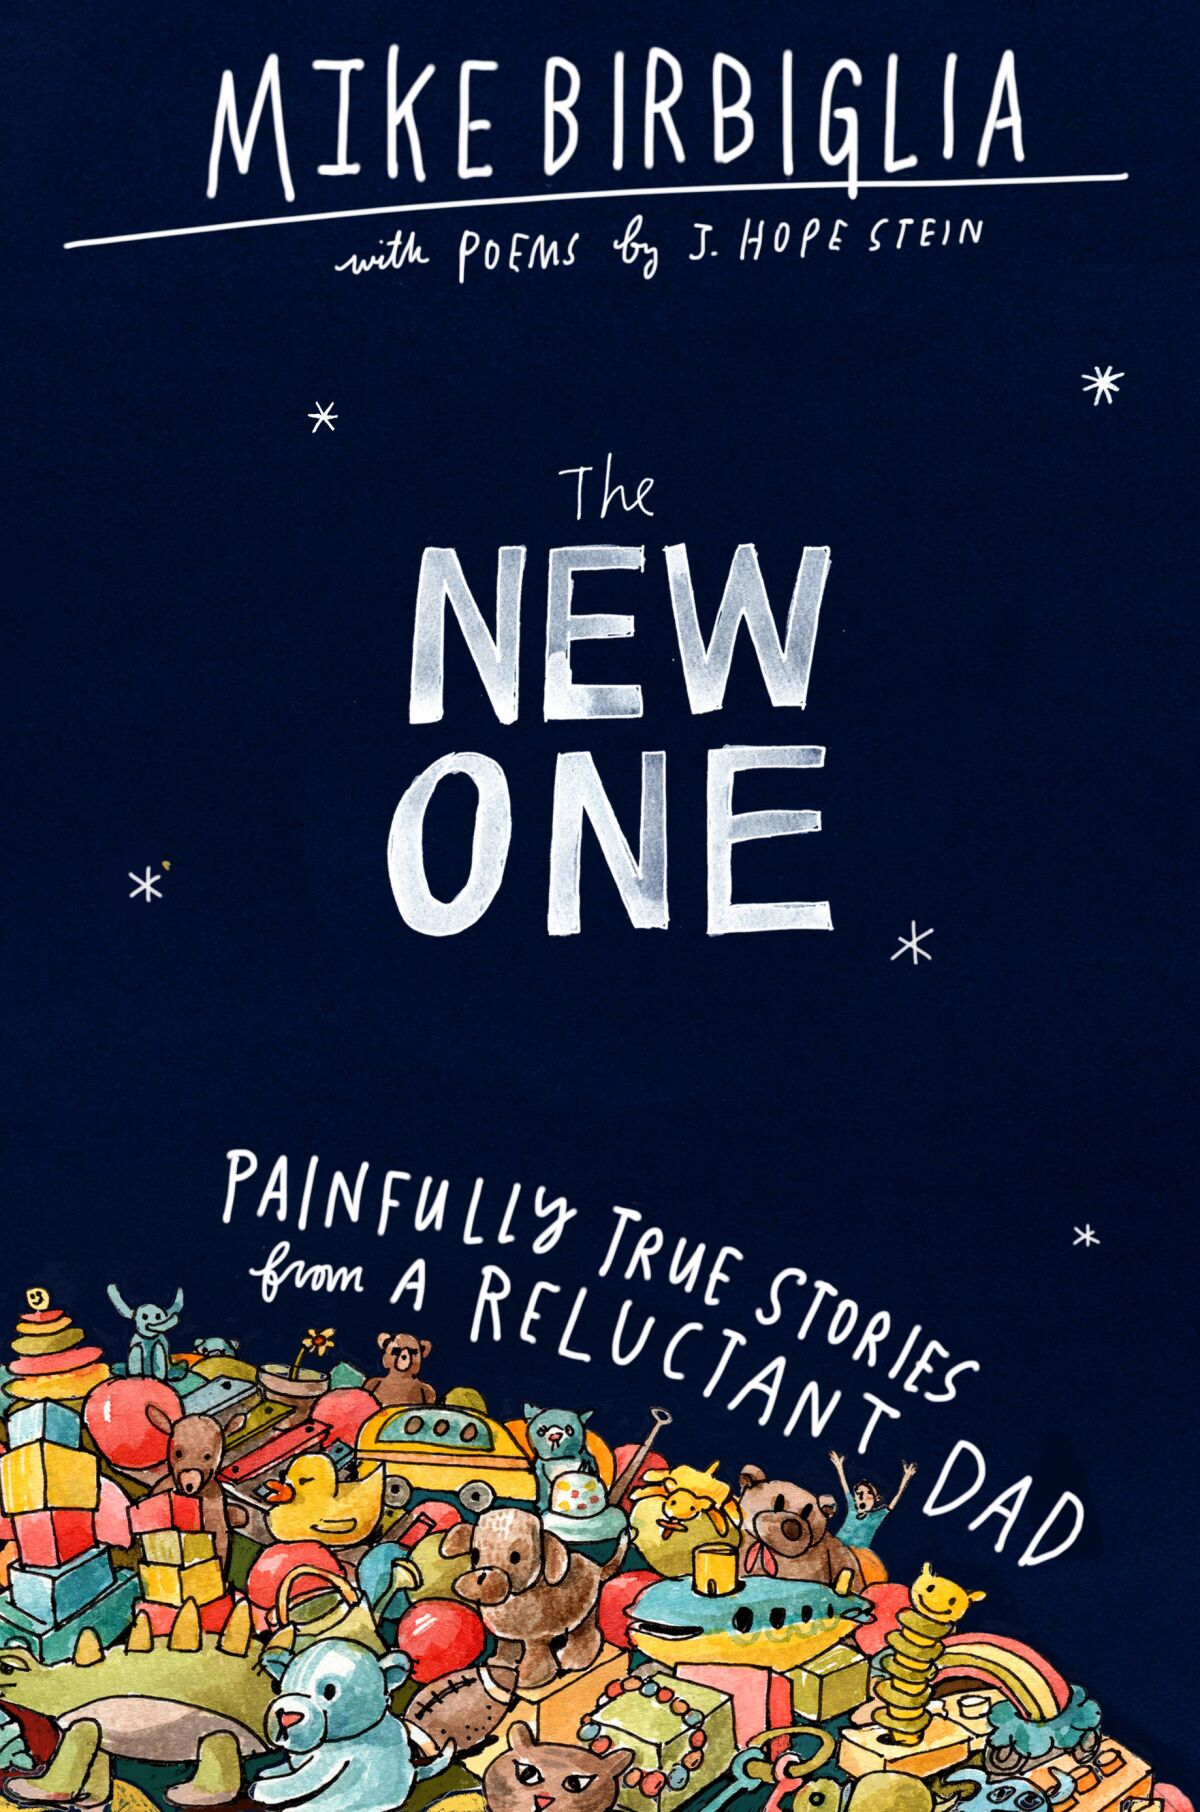 A book jacket for Mike Birbiglia and J. Hope Stein's "The New One."